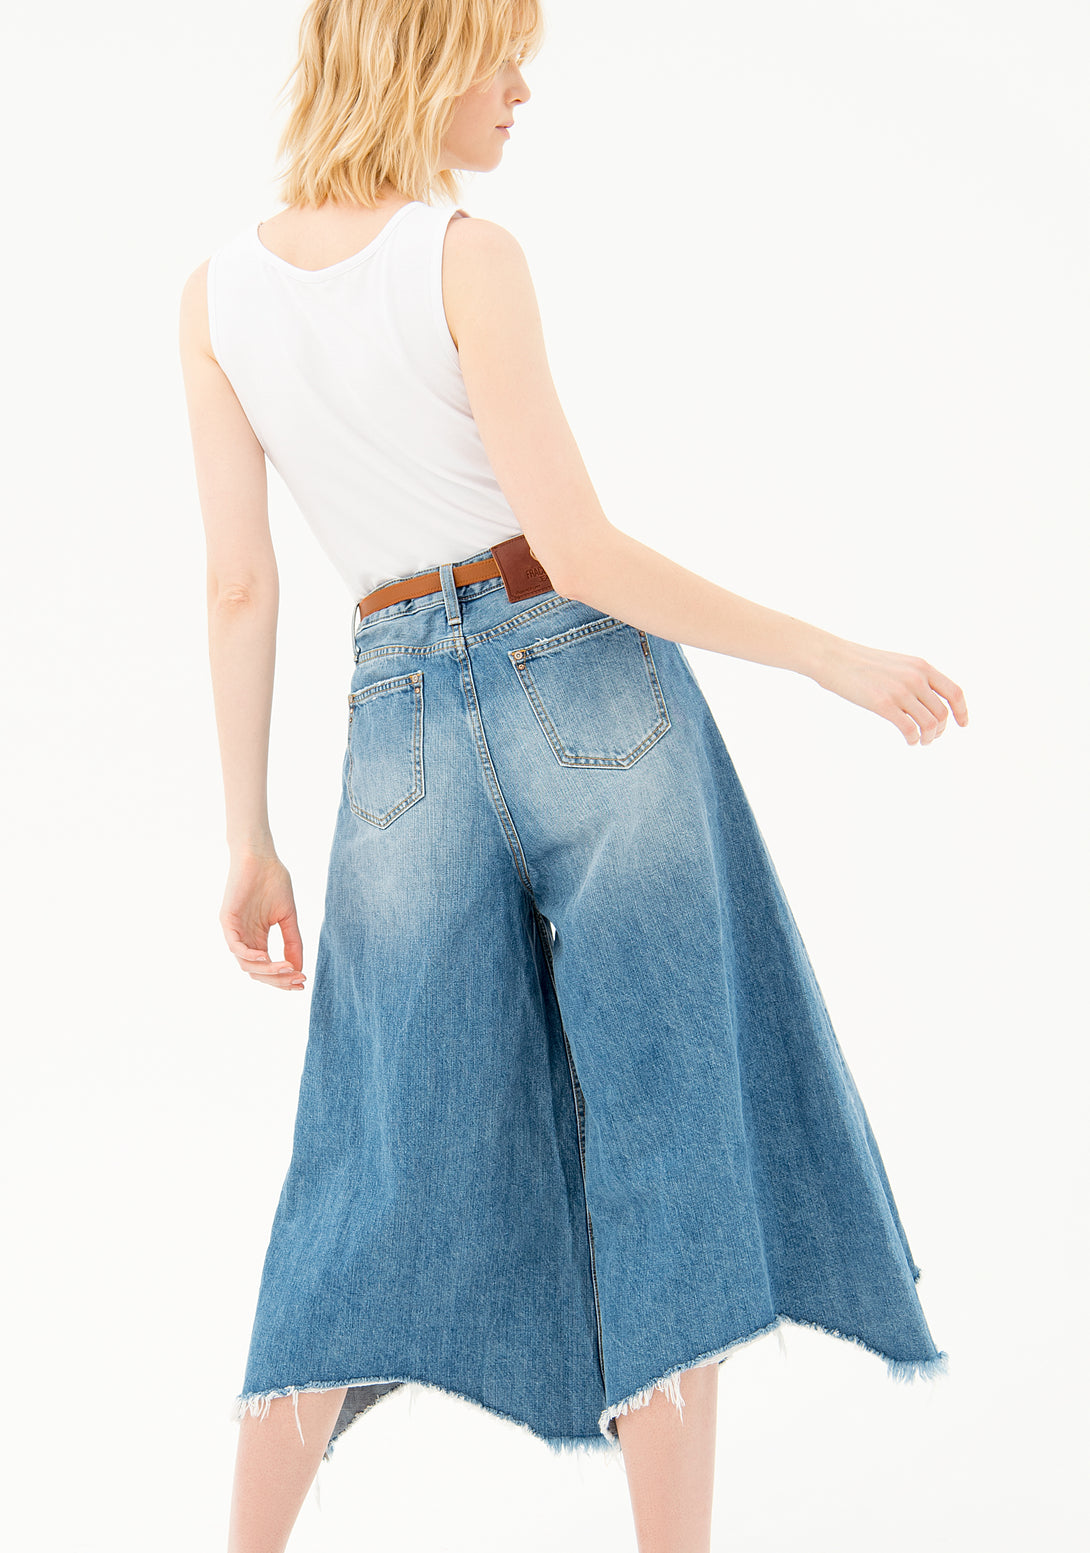 Culotte jeans flared fit made in denim with middle wash and rips